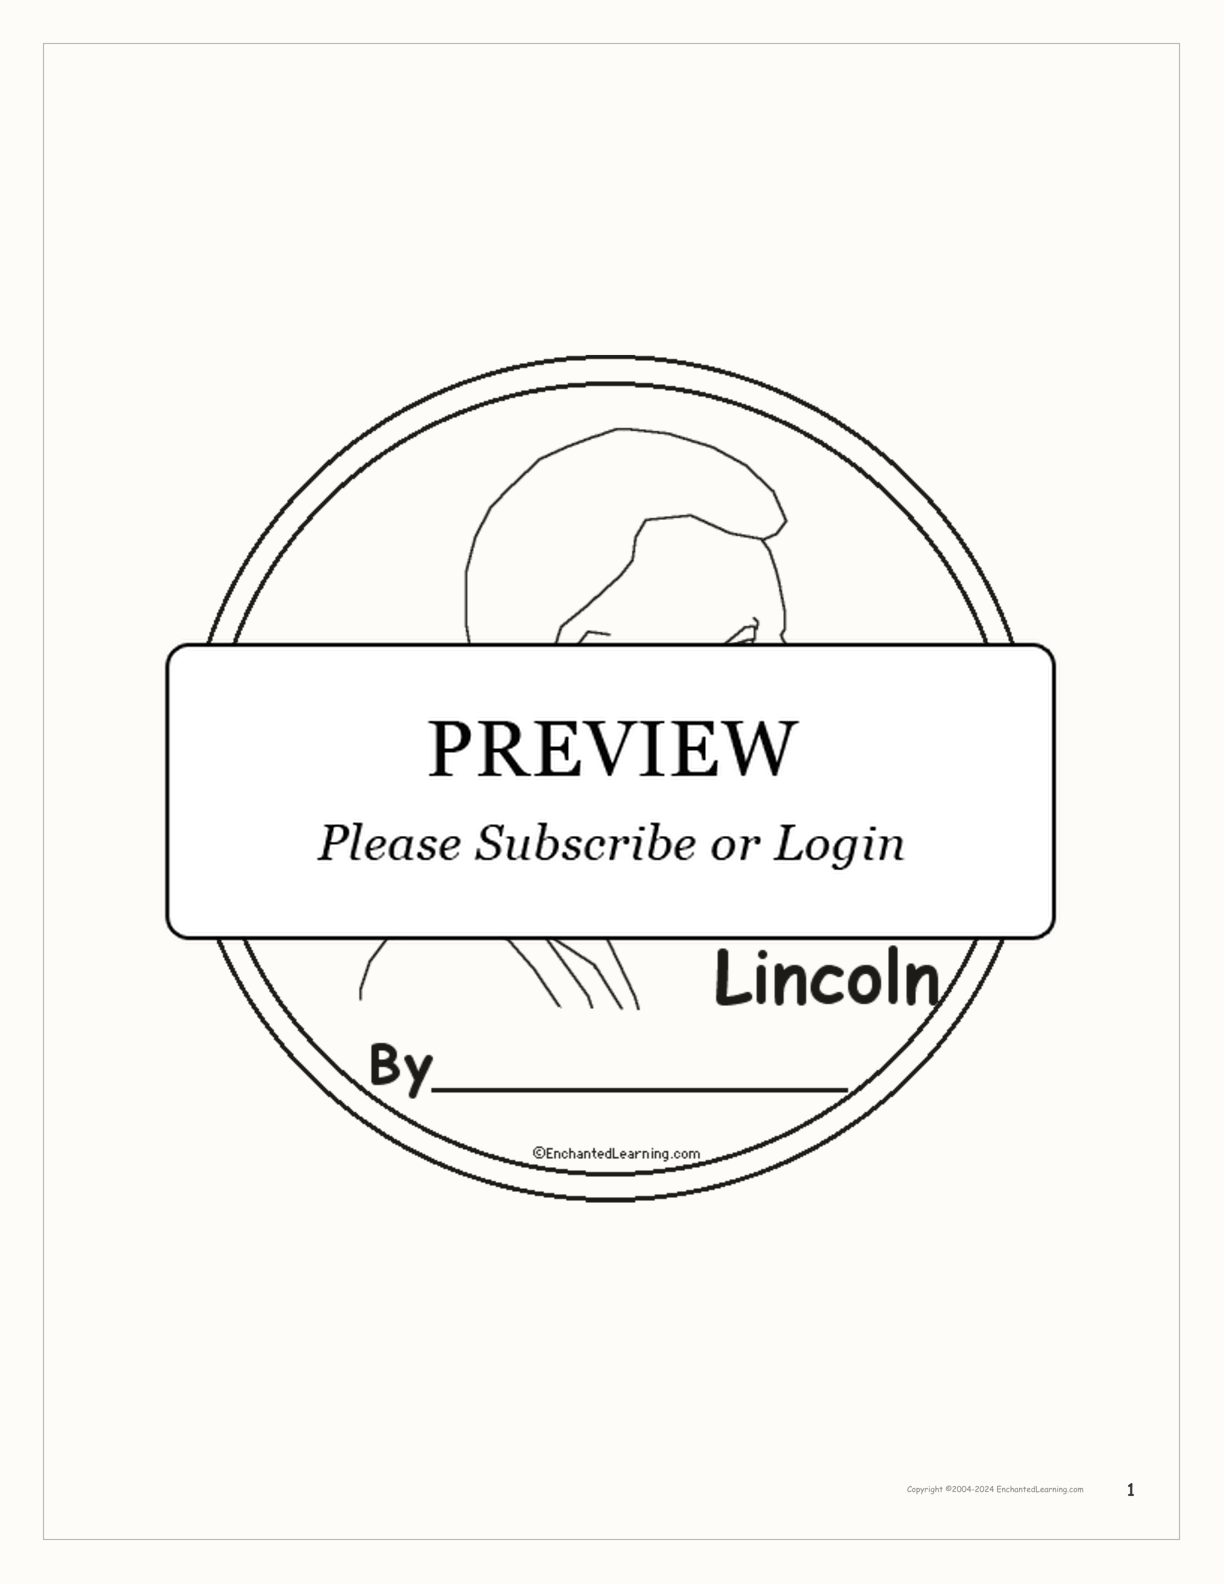 Abraham Lincoln Book interactive printout page 1